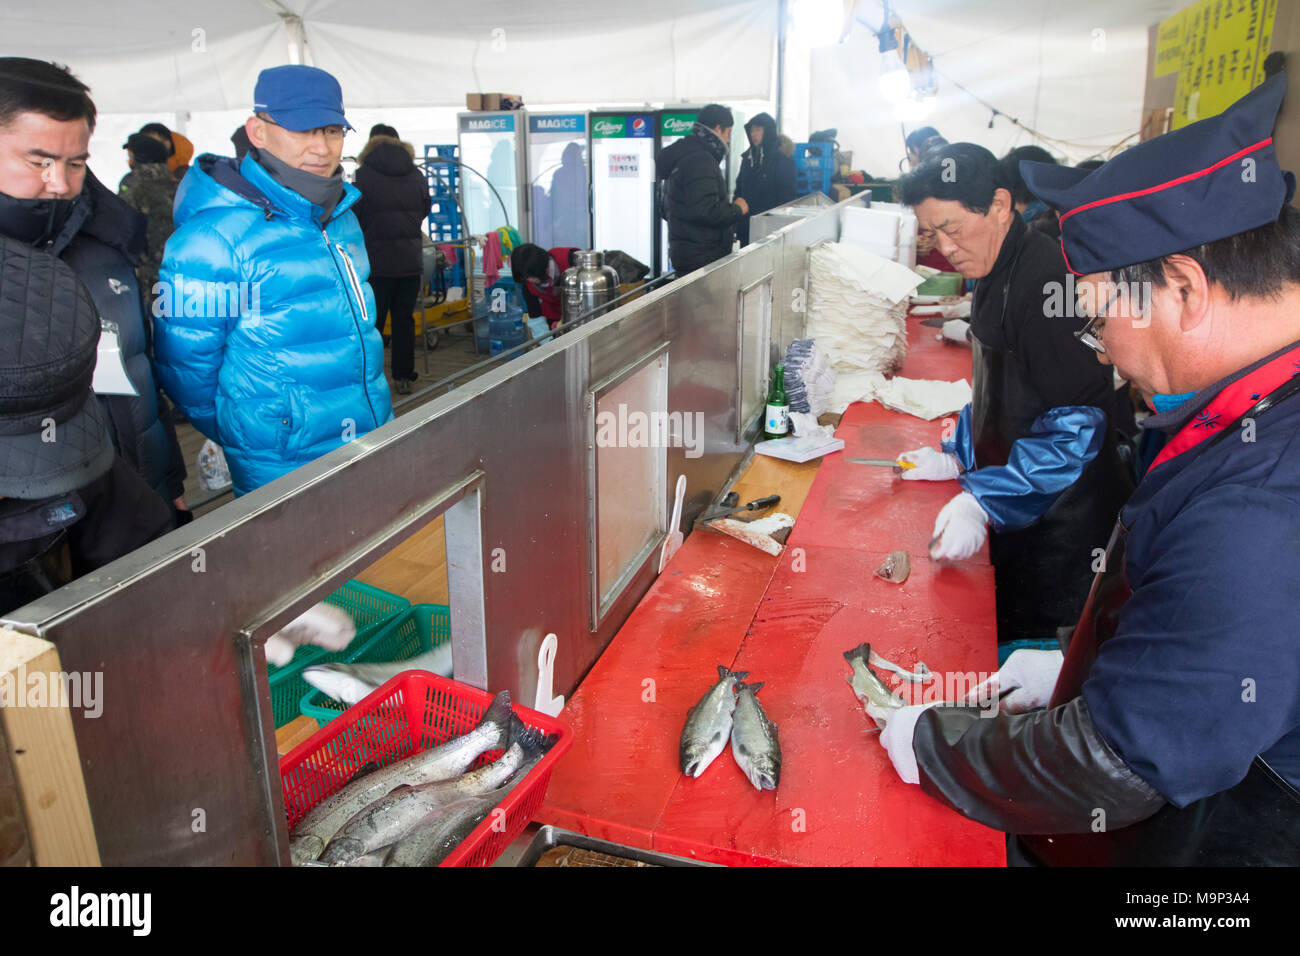 Men are waiting while their freshly caught fish is being prepared.    The Hwacheon Sancheoneo Ice Festival is a tradition for Korean people. Every year in January crowds gather at the frozen river to celebrate the cold and snow of winter. Main attraction is ice fishing. Young and old wait patiently over a small hole in the ice for a trout to bite. In tents they can let the fish grilled after which they are eaten. Among other activities are sledding and ice skating.  The nearby Pyeongchang region will host the Winter Olympics in February 2018. Stock Photo